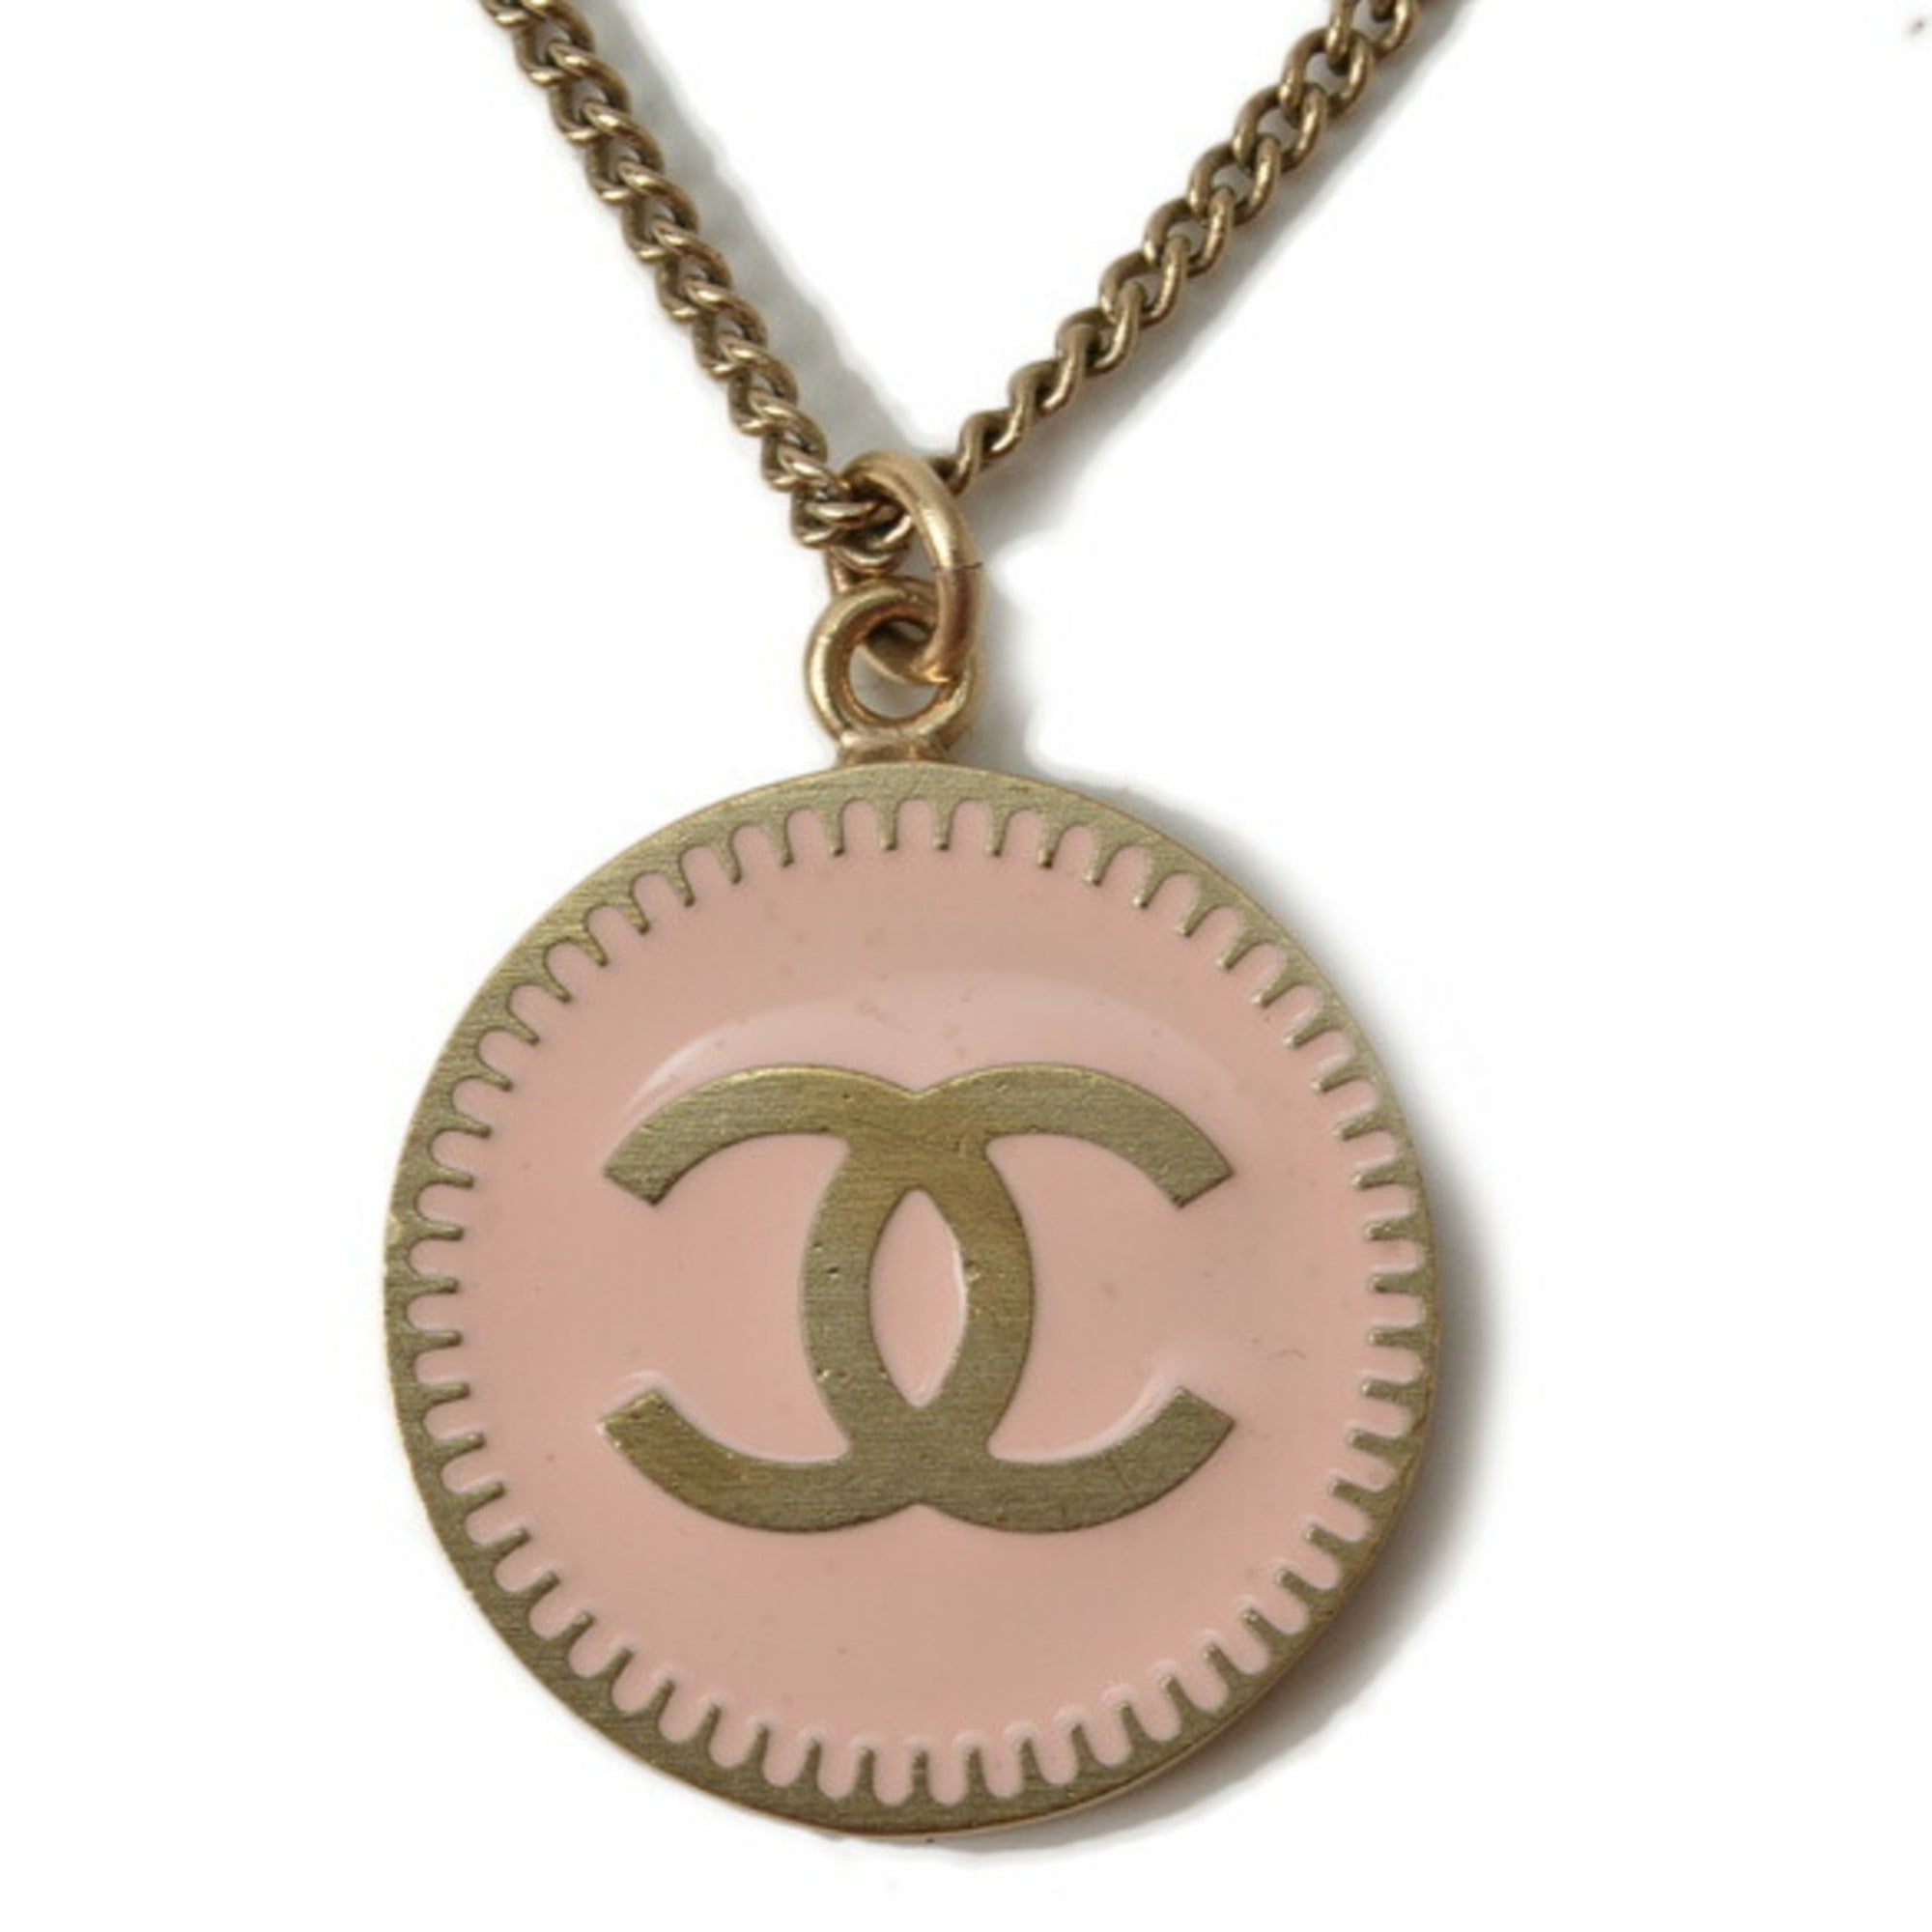 Chanel necklace/pendant CHANEL CC mark/coco mark light pink/gold